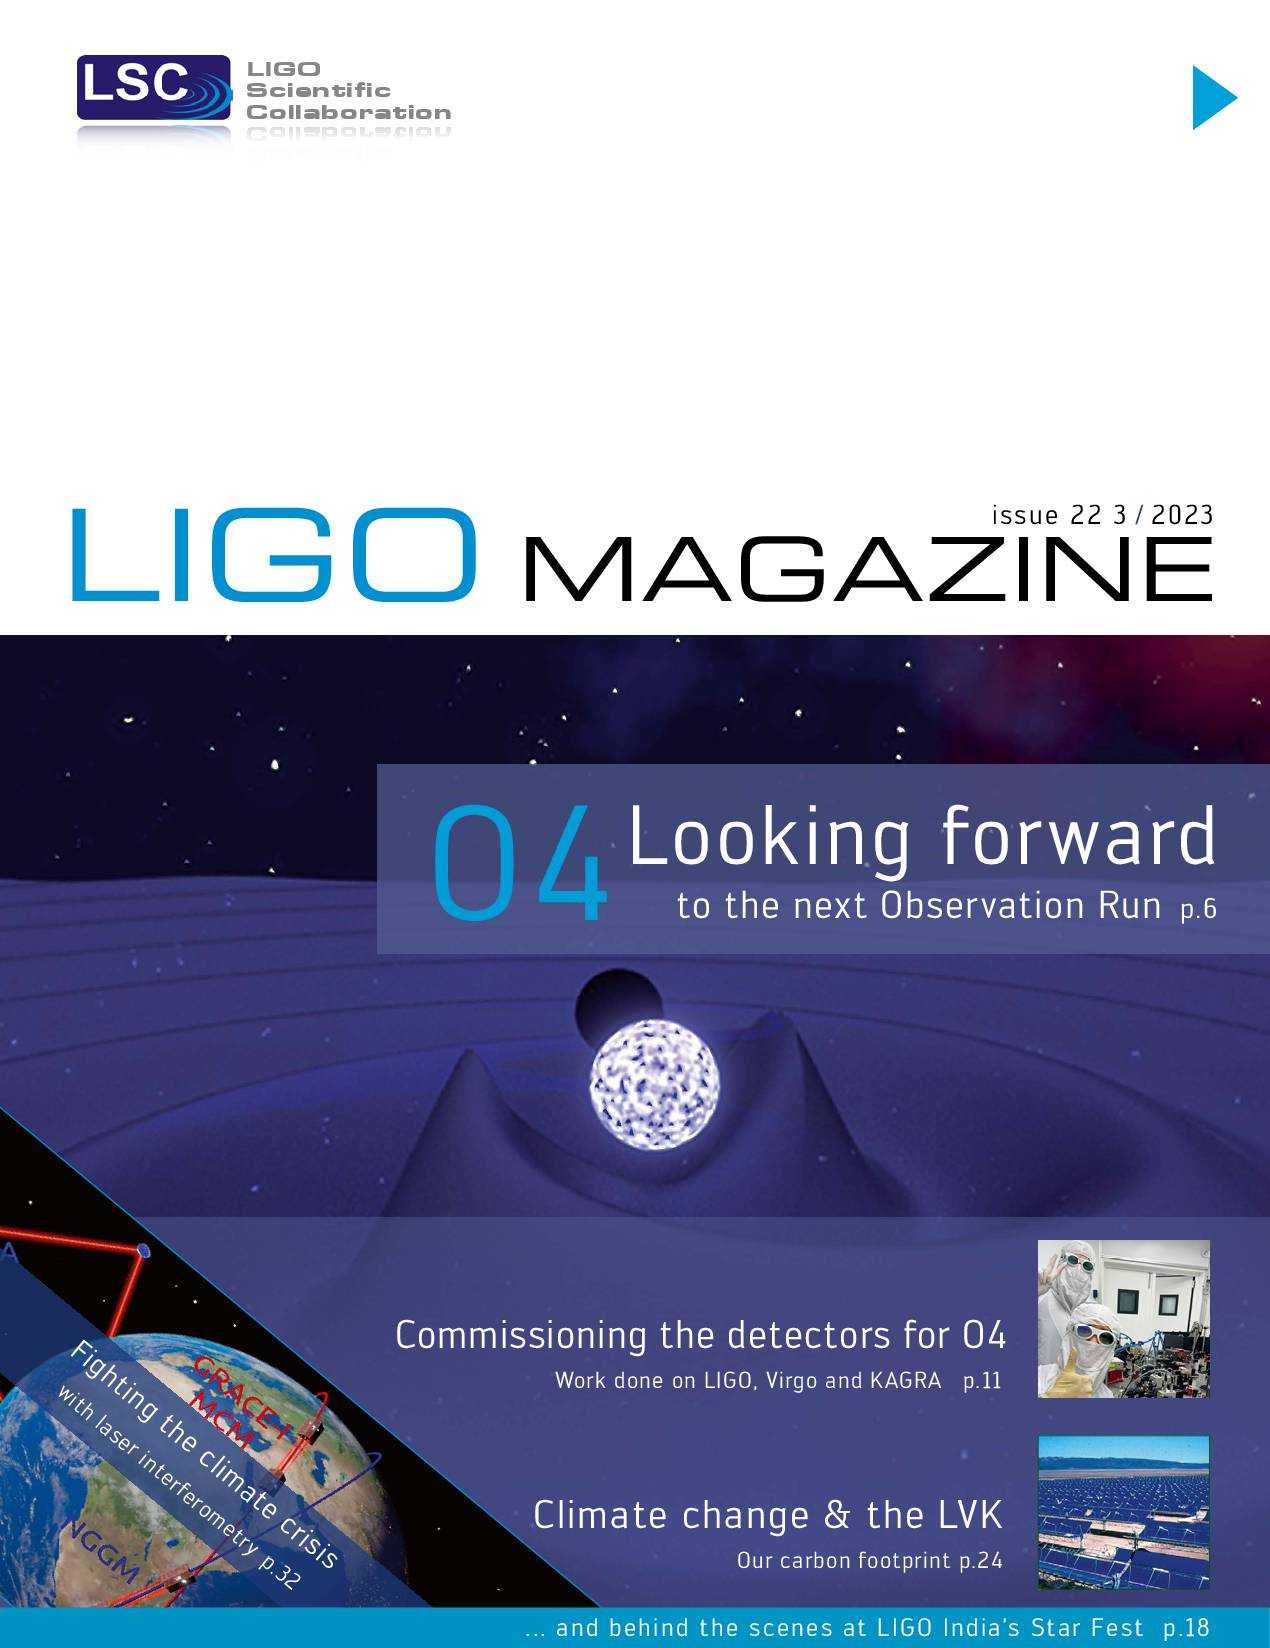 News-Image 1 of: New LIGO Magazine Issue 22 is out